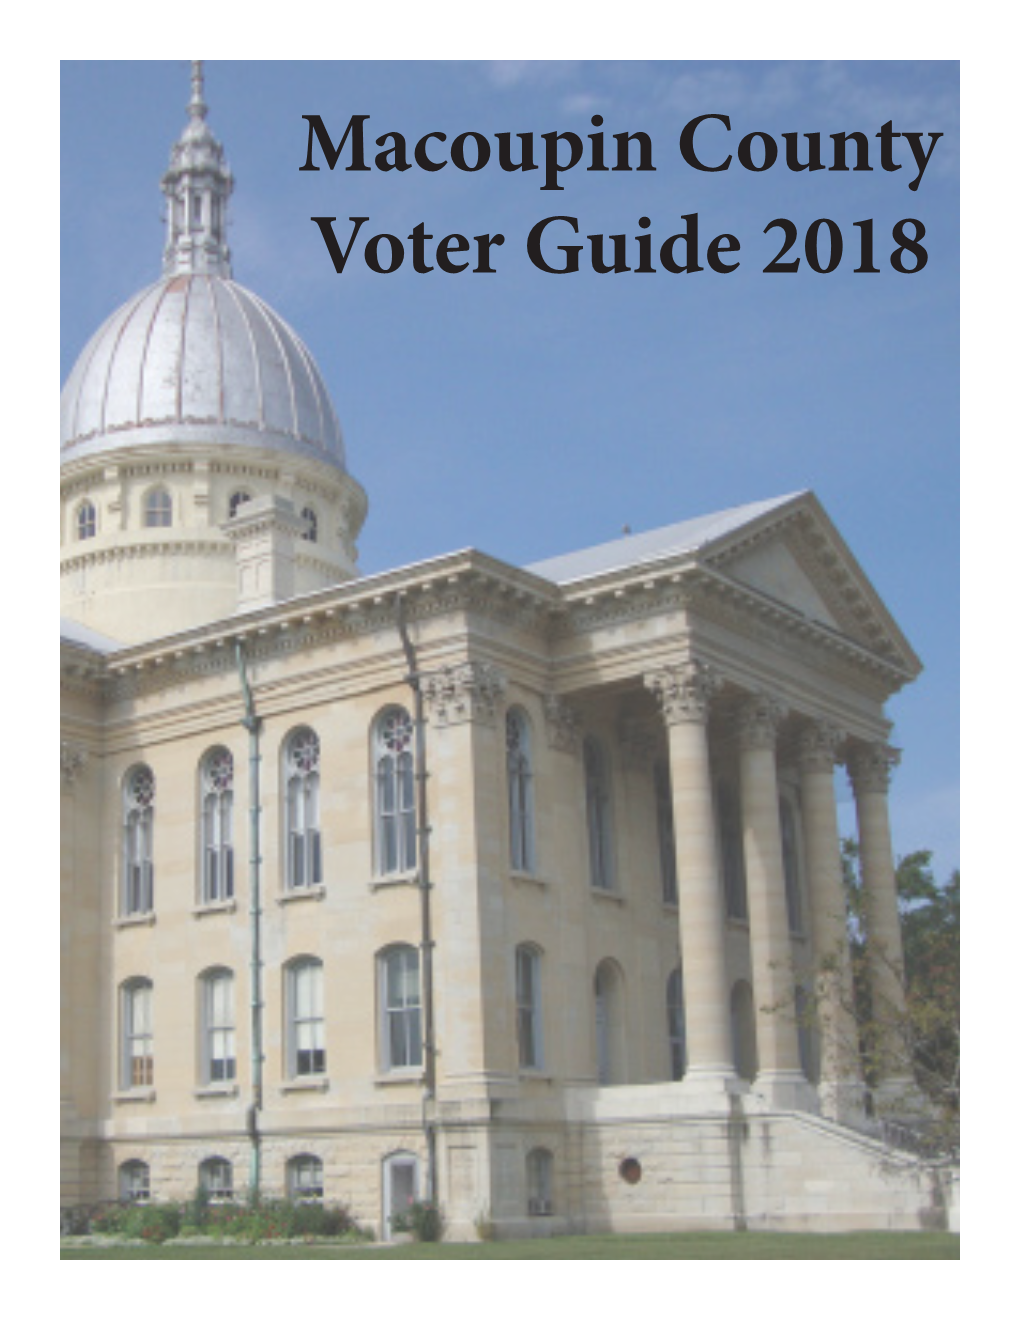 Macoupin County Voter Guide 2018 Created By: the Class of Political Science 315 - US Political Parties and Elections